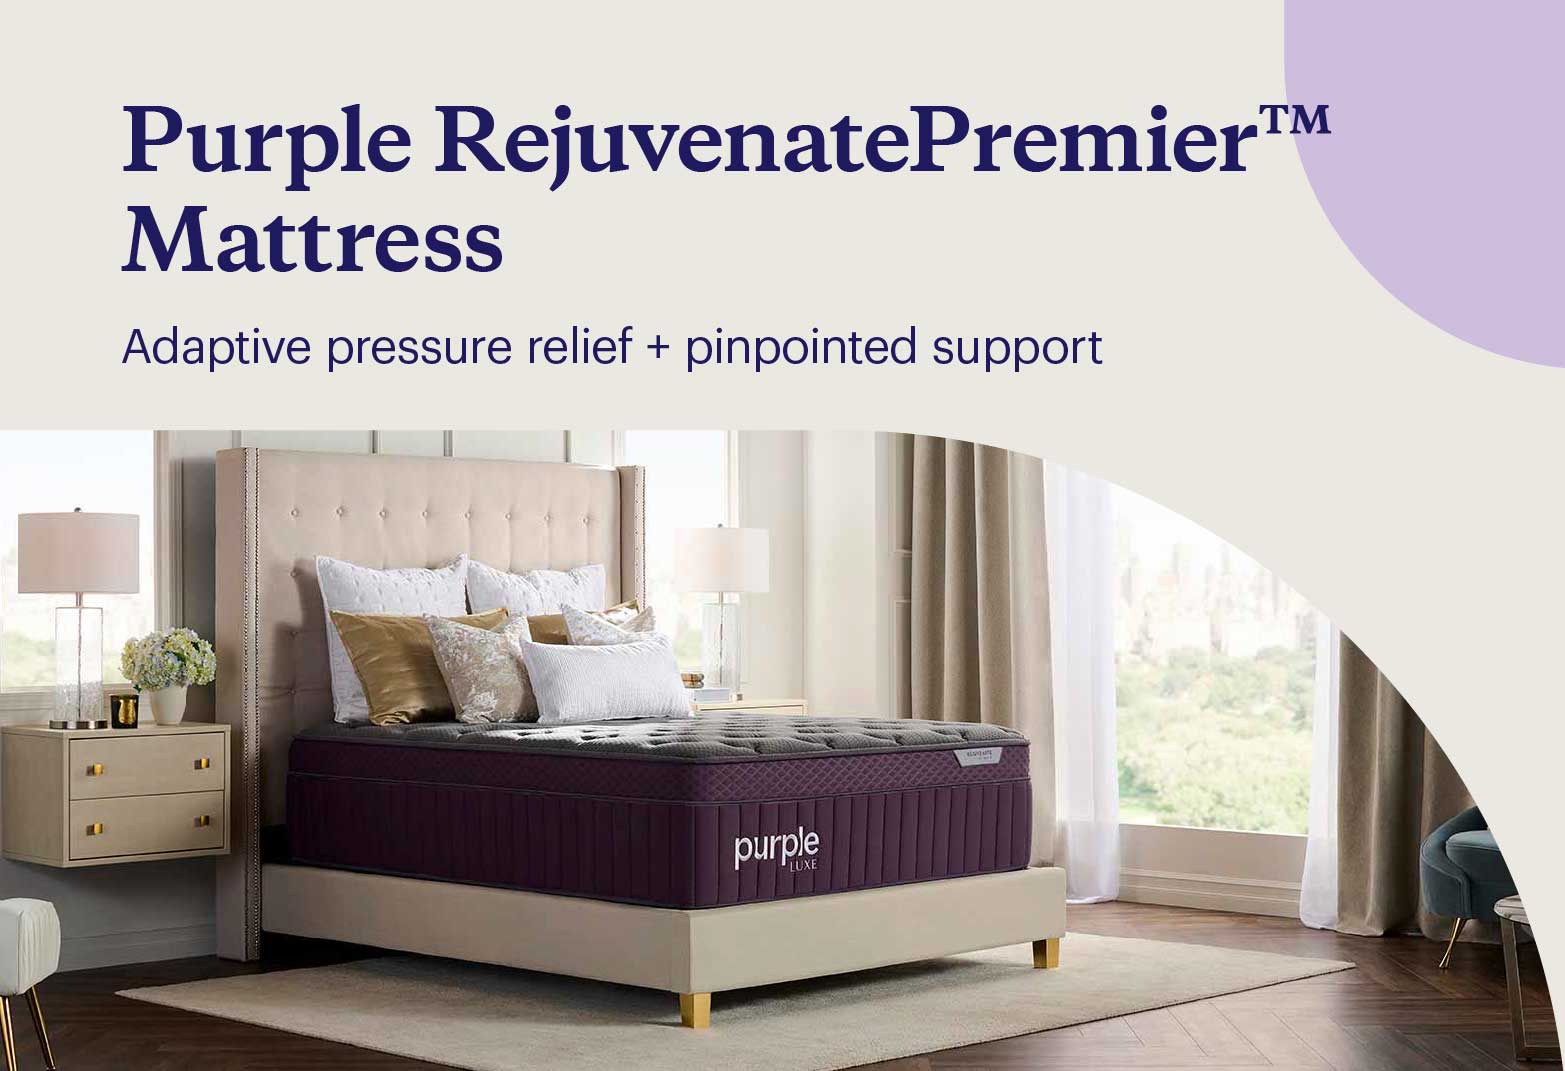 Key features of the Purple RejuvenatePremier™ mattress shown with the bed on an upholstered bedframe in a contemporary bedroom.